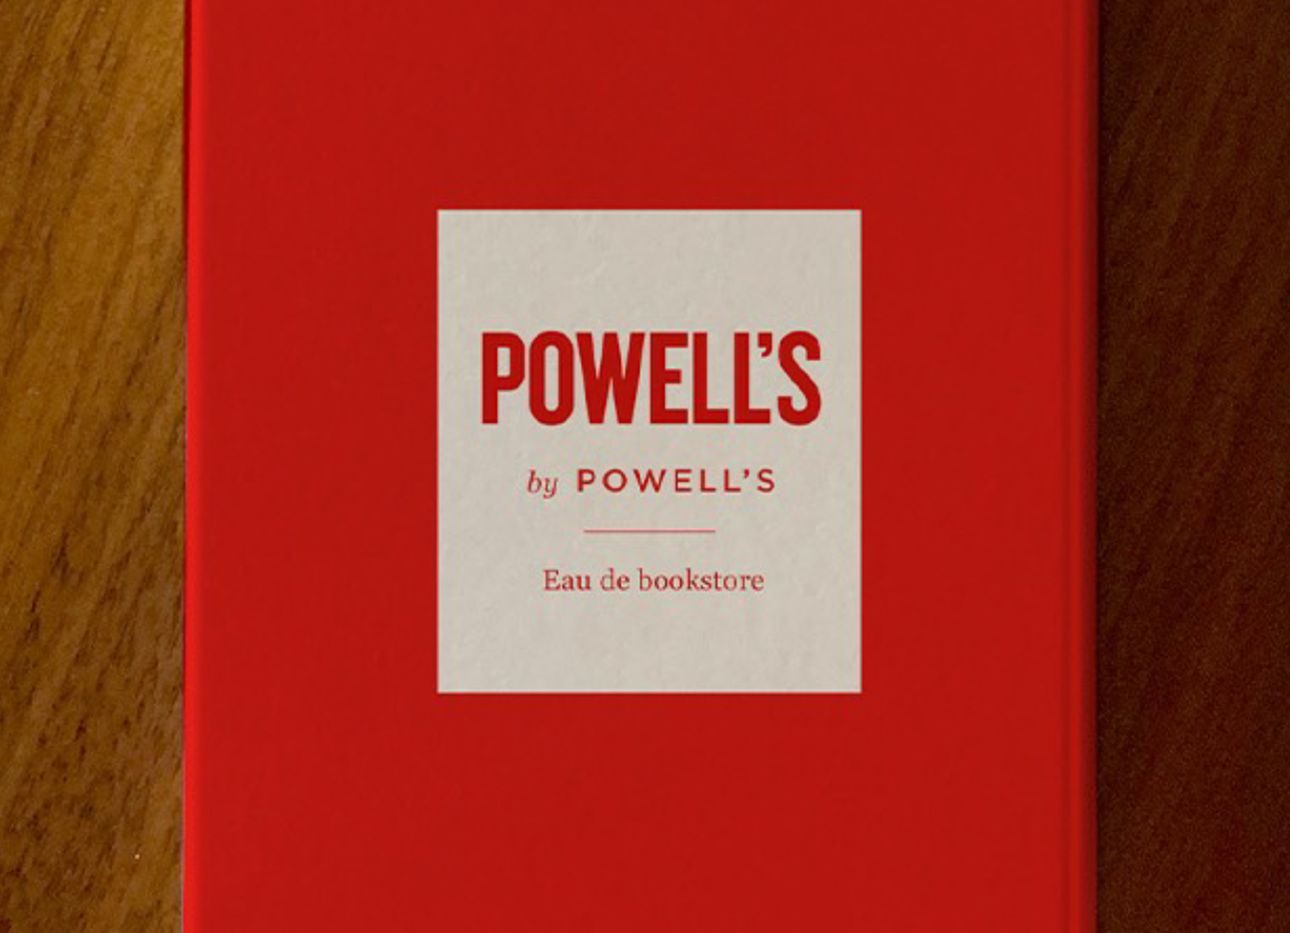 A red Powell's by Powell's book on a wooden table.